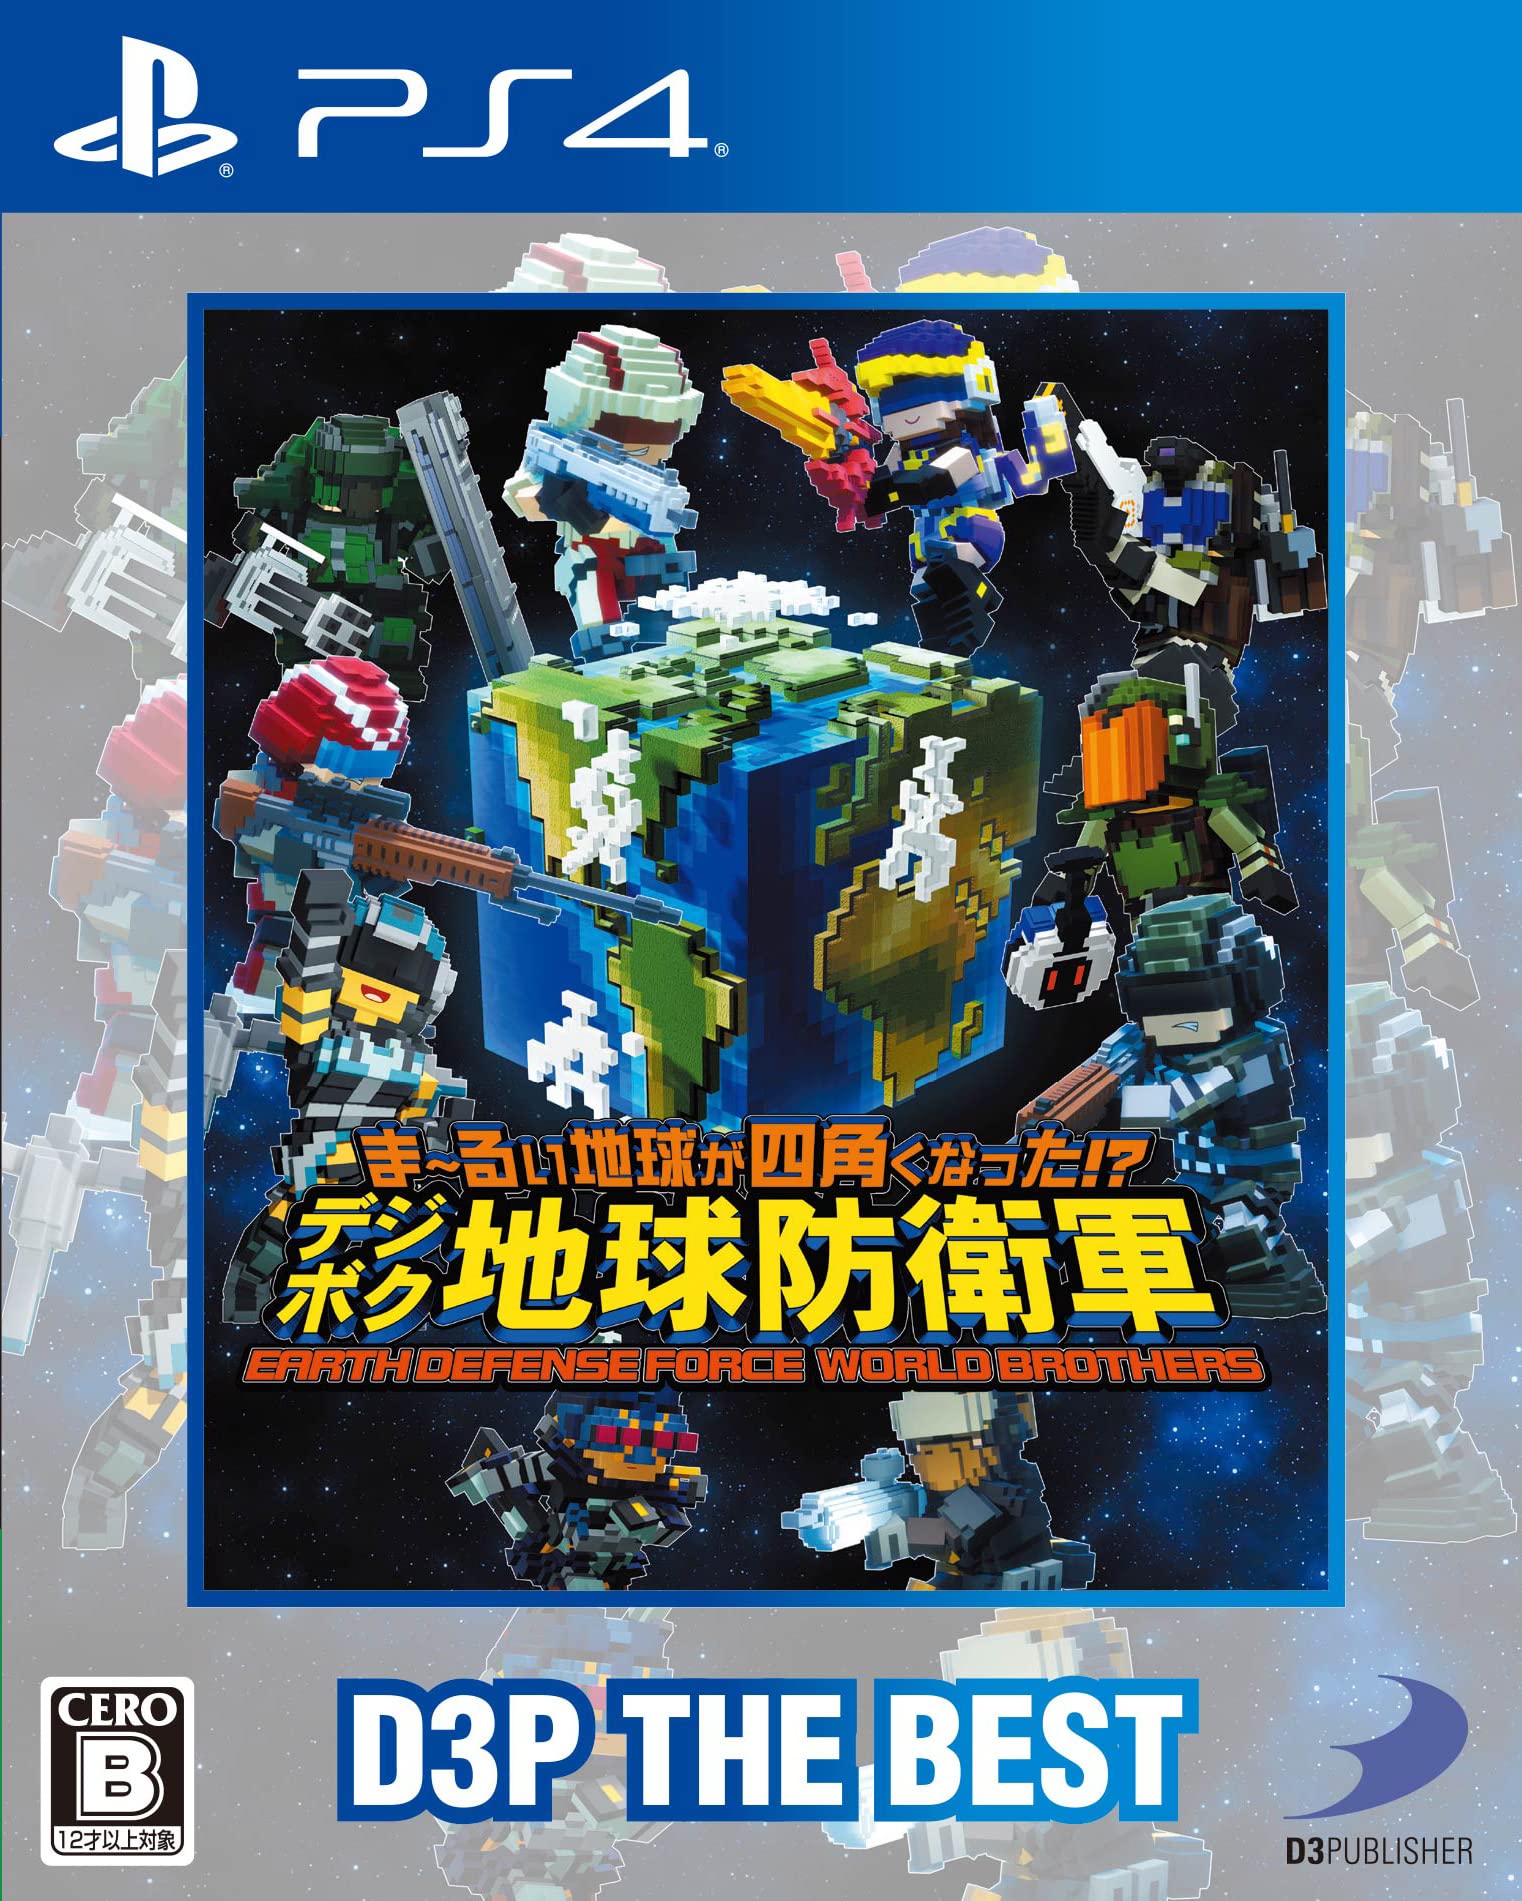 【PS4】ま~るい地球が四角くなった!? デジボク地球防衛軍 EARTH DEFENSE FORCE: WORLD BROTHERS D3P THE